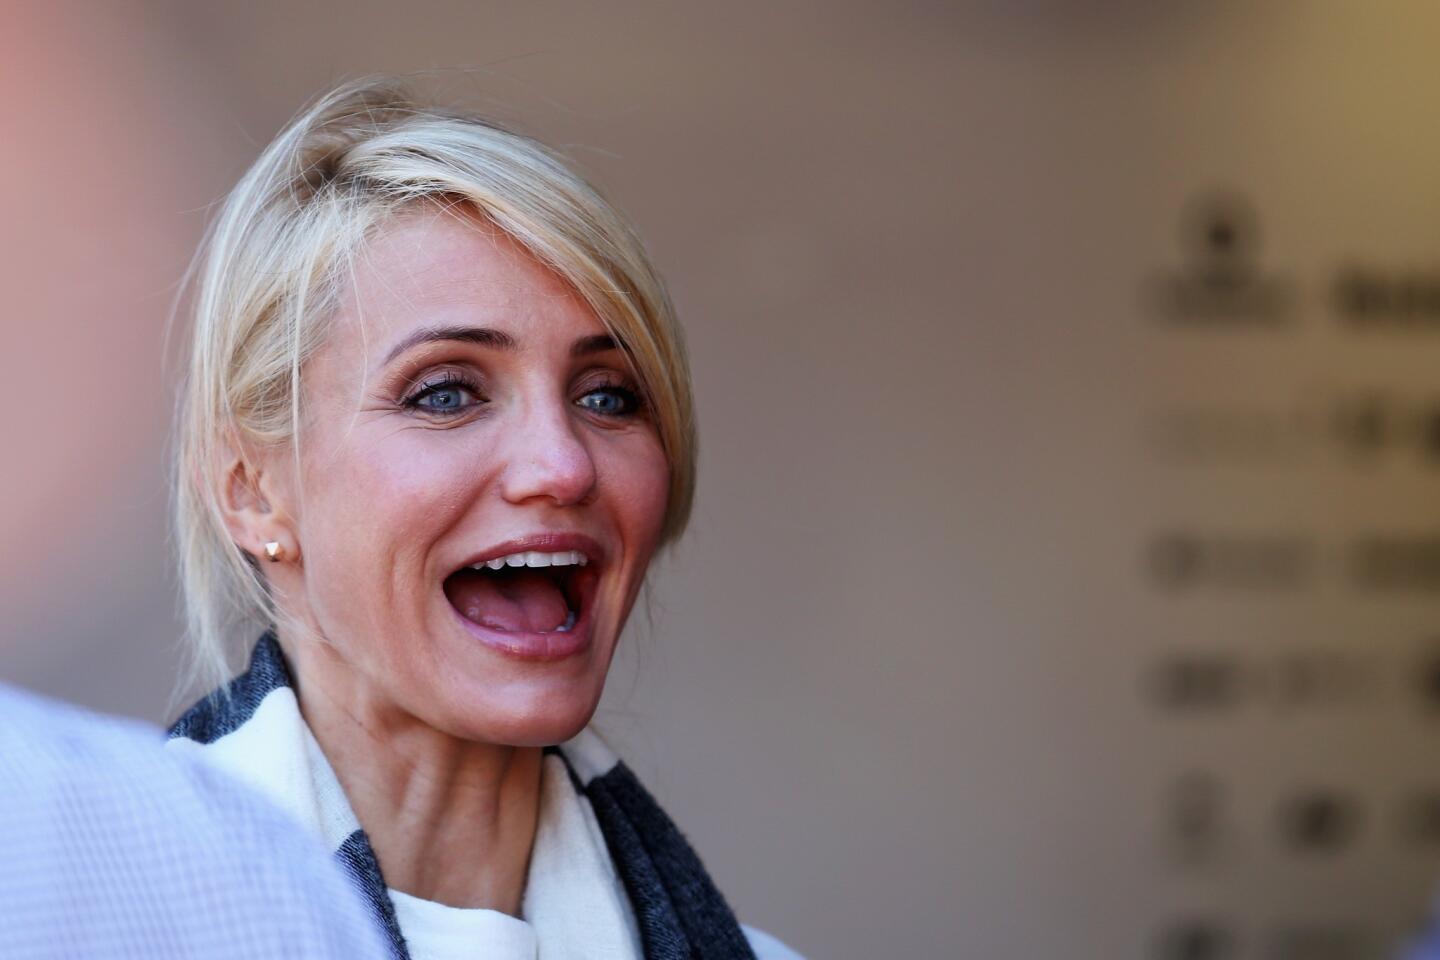 Cameron Diaz goes further down "bad girl" ladder with new role